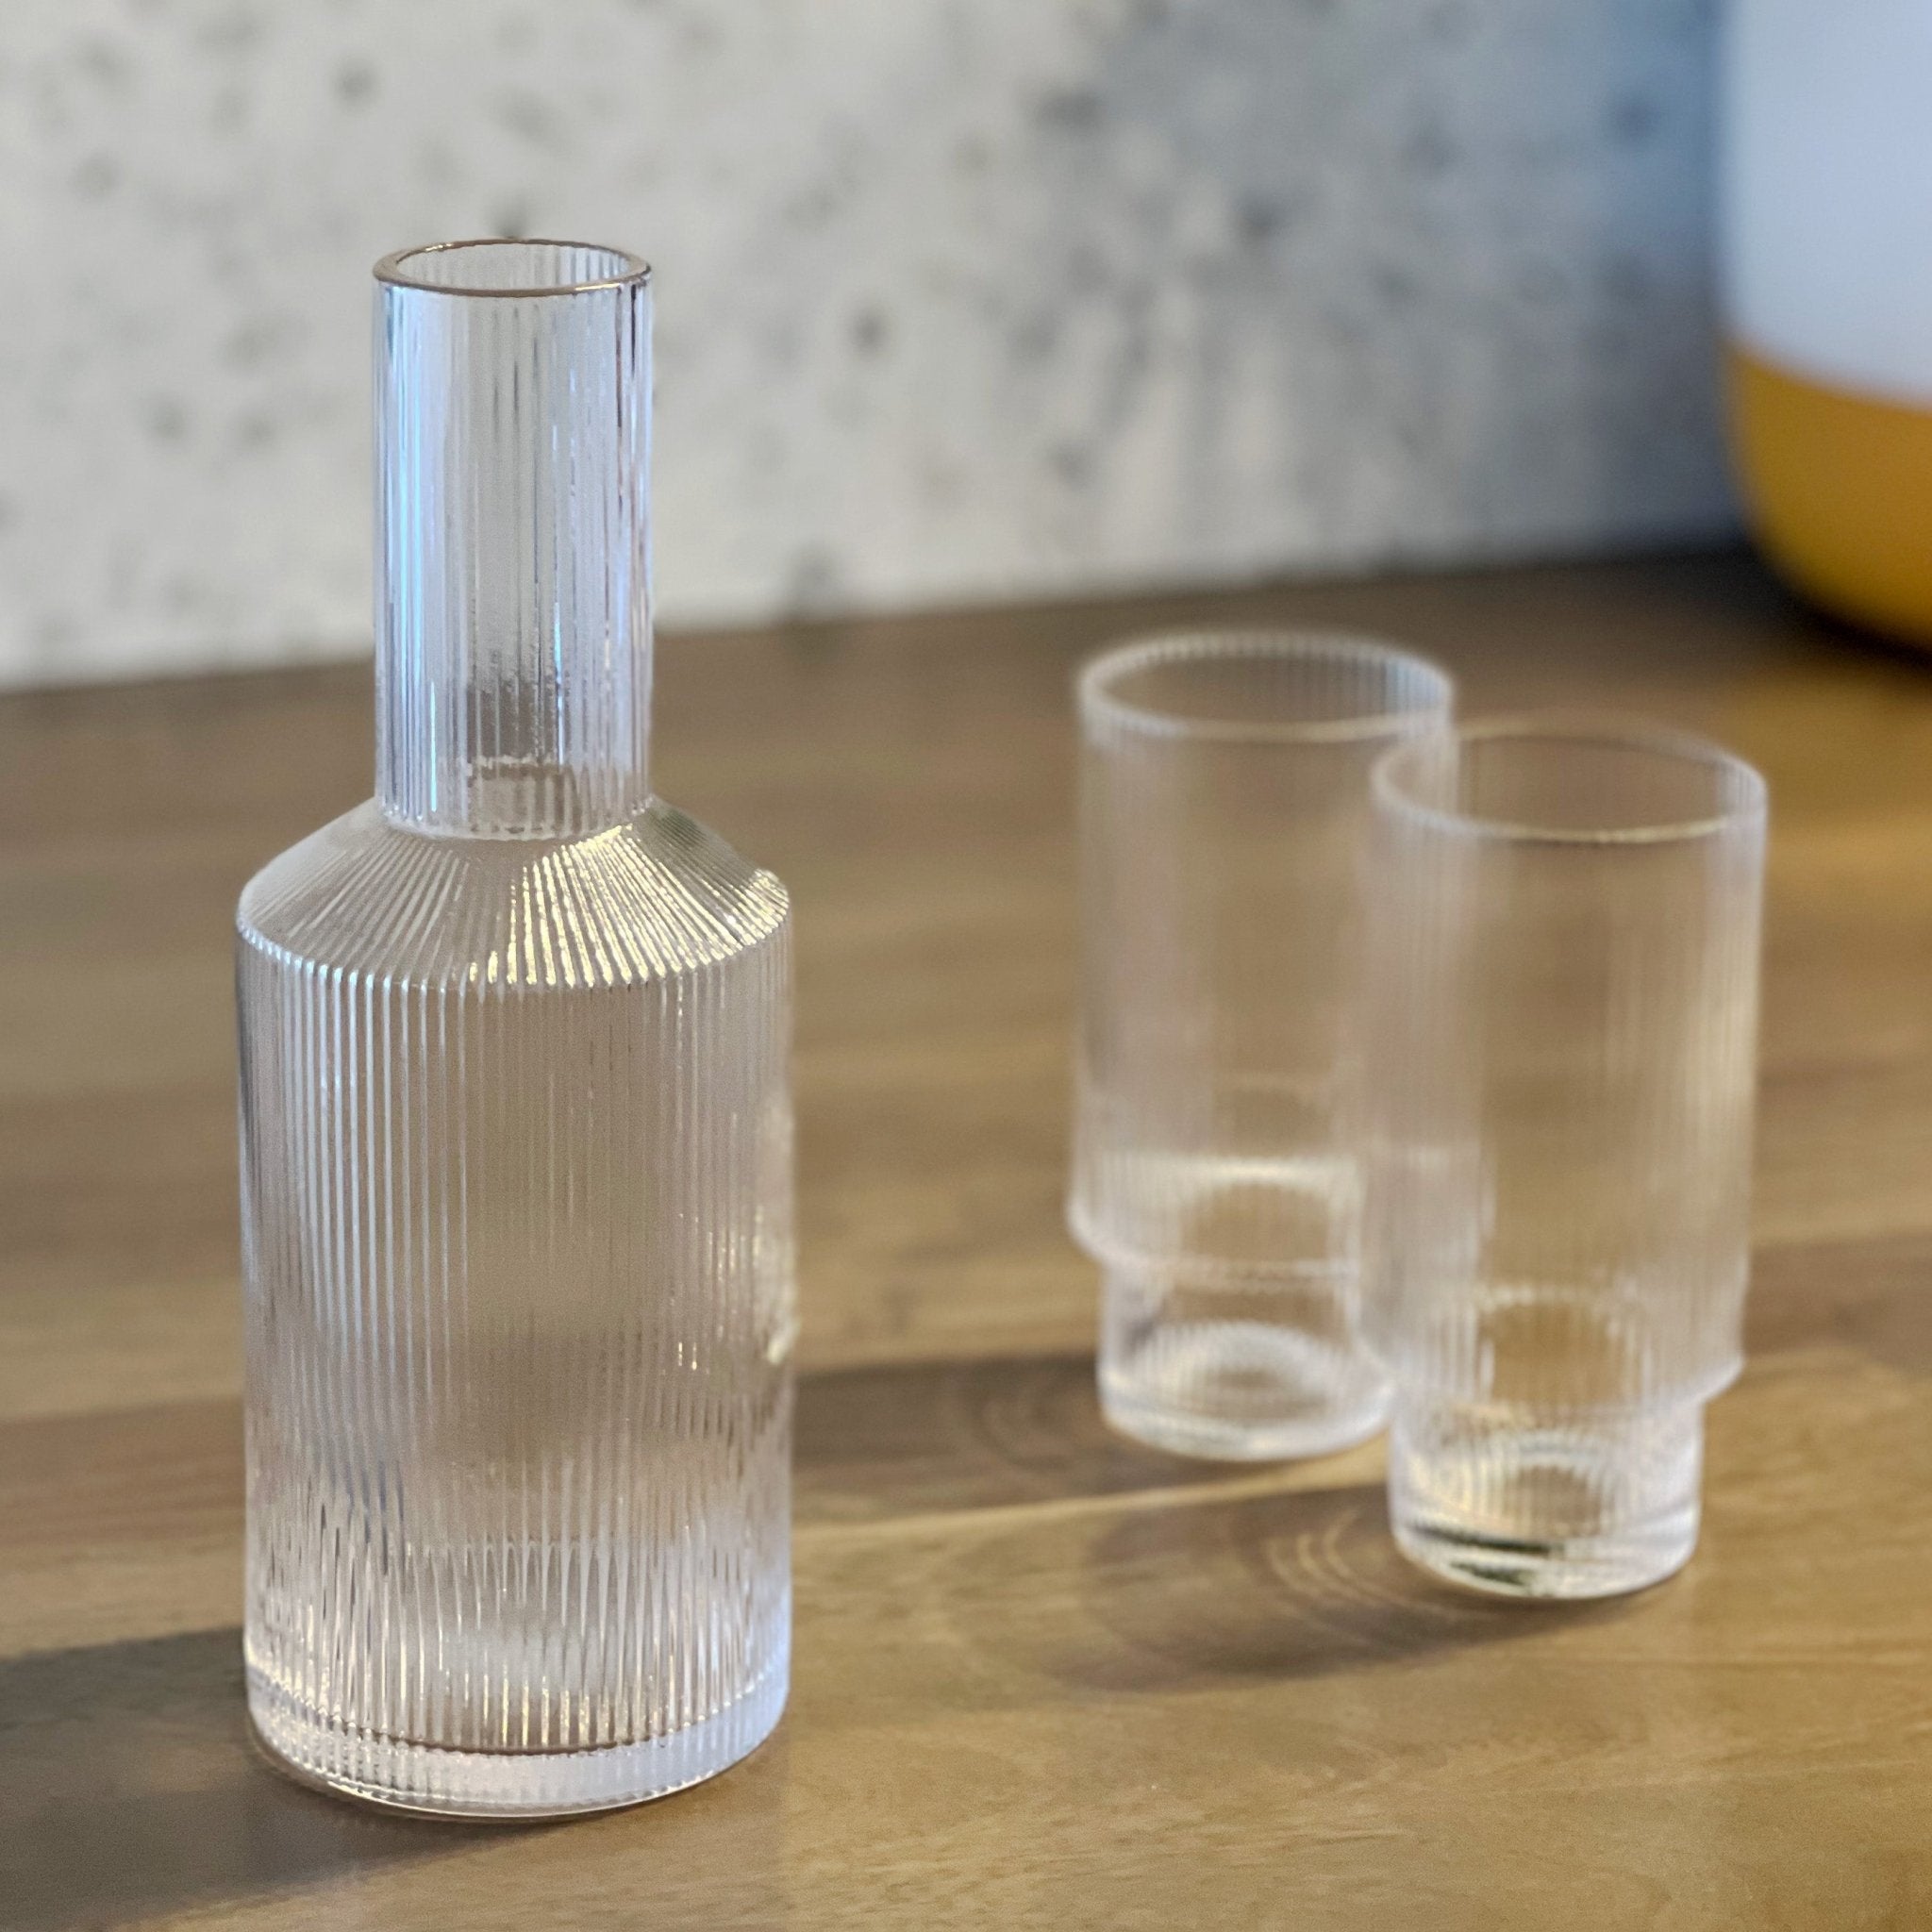 Glass Bedside Water Carafe with Lid and Glass Cups Set, Ribbed